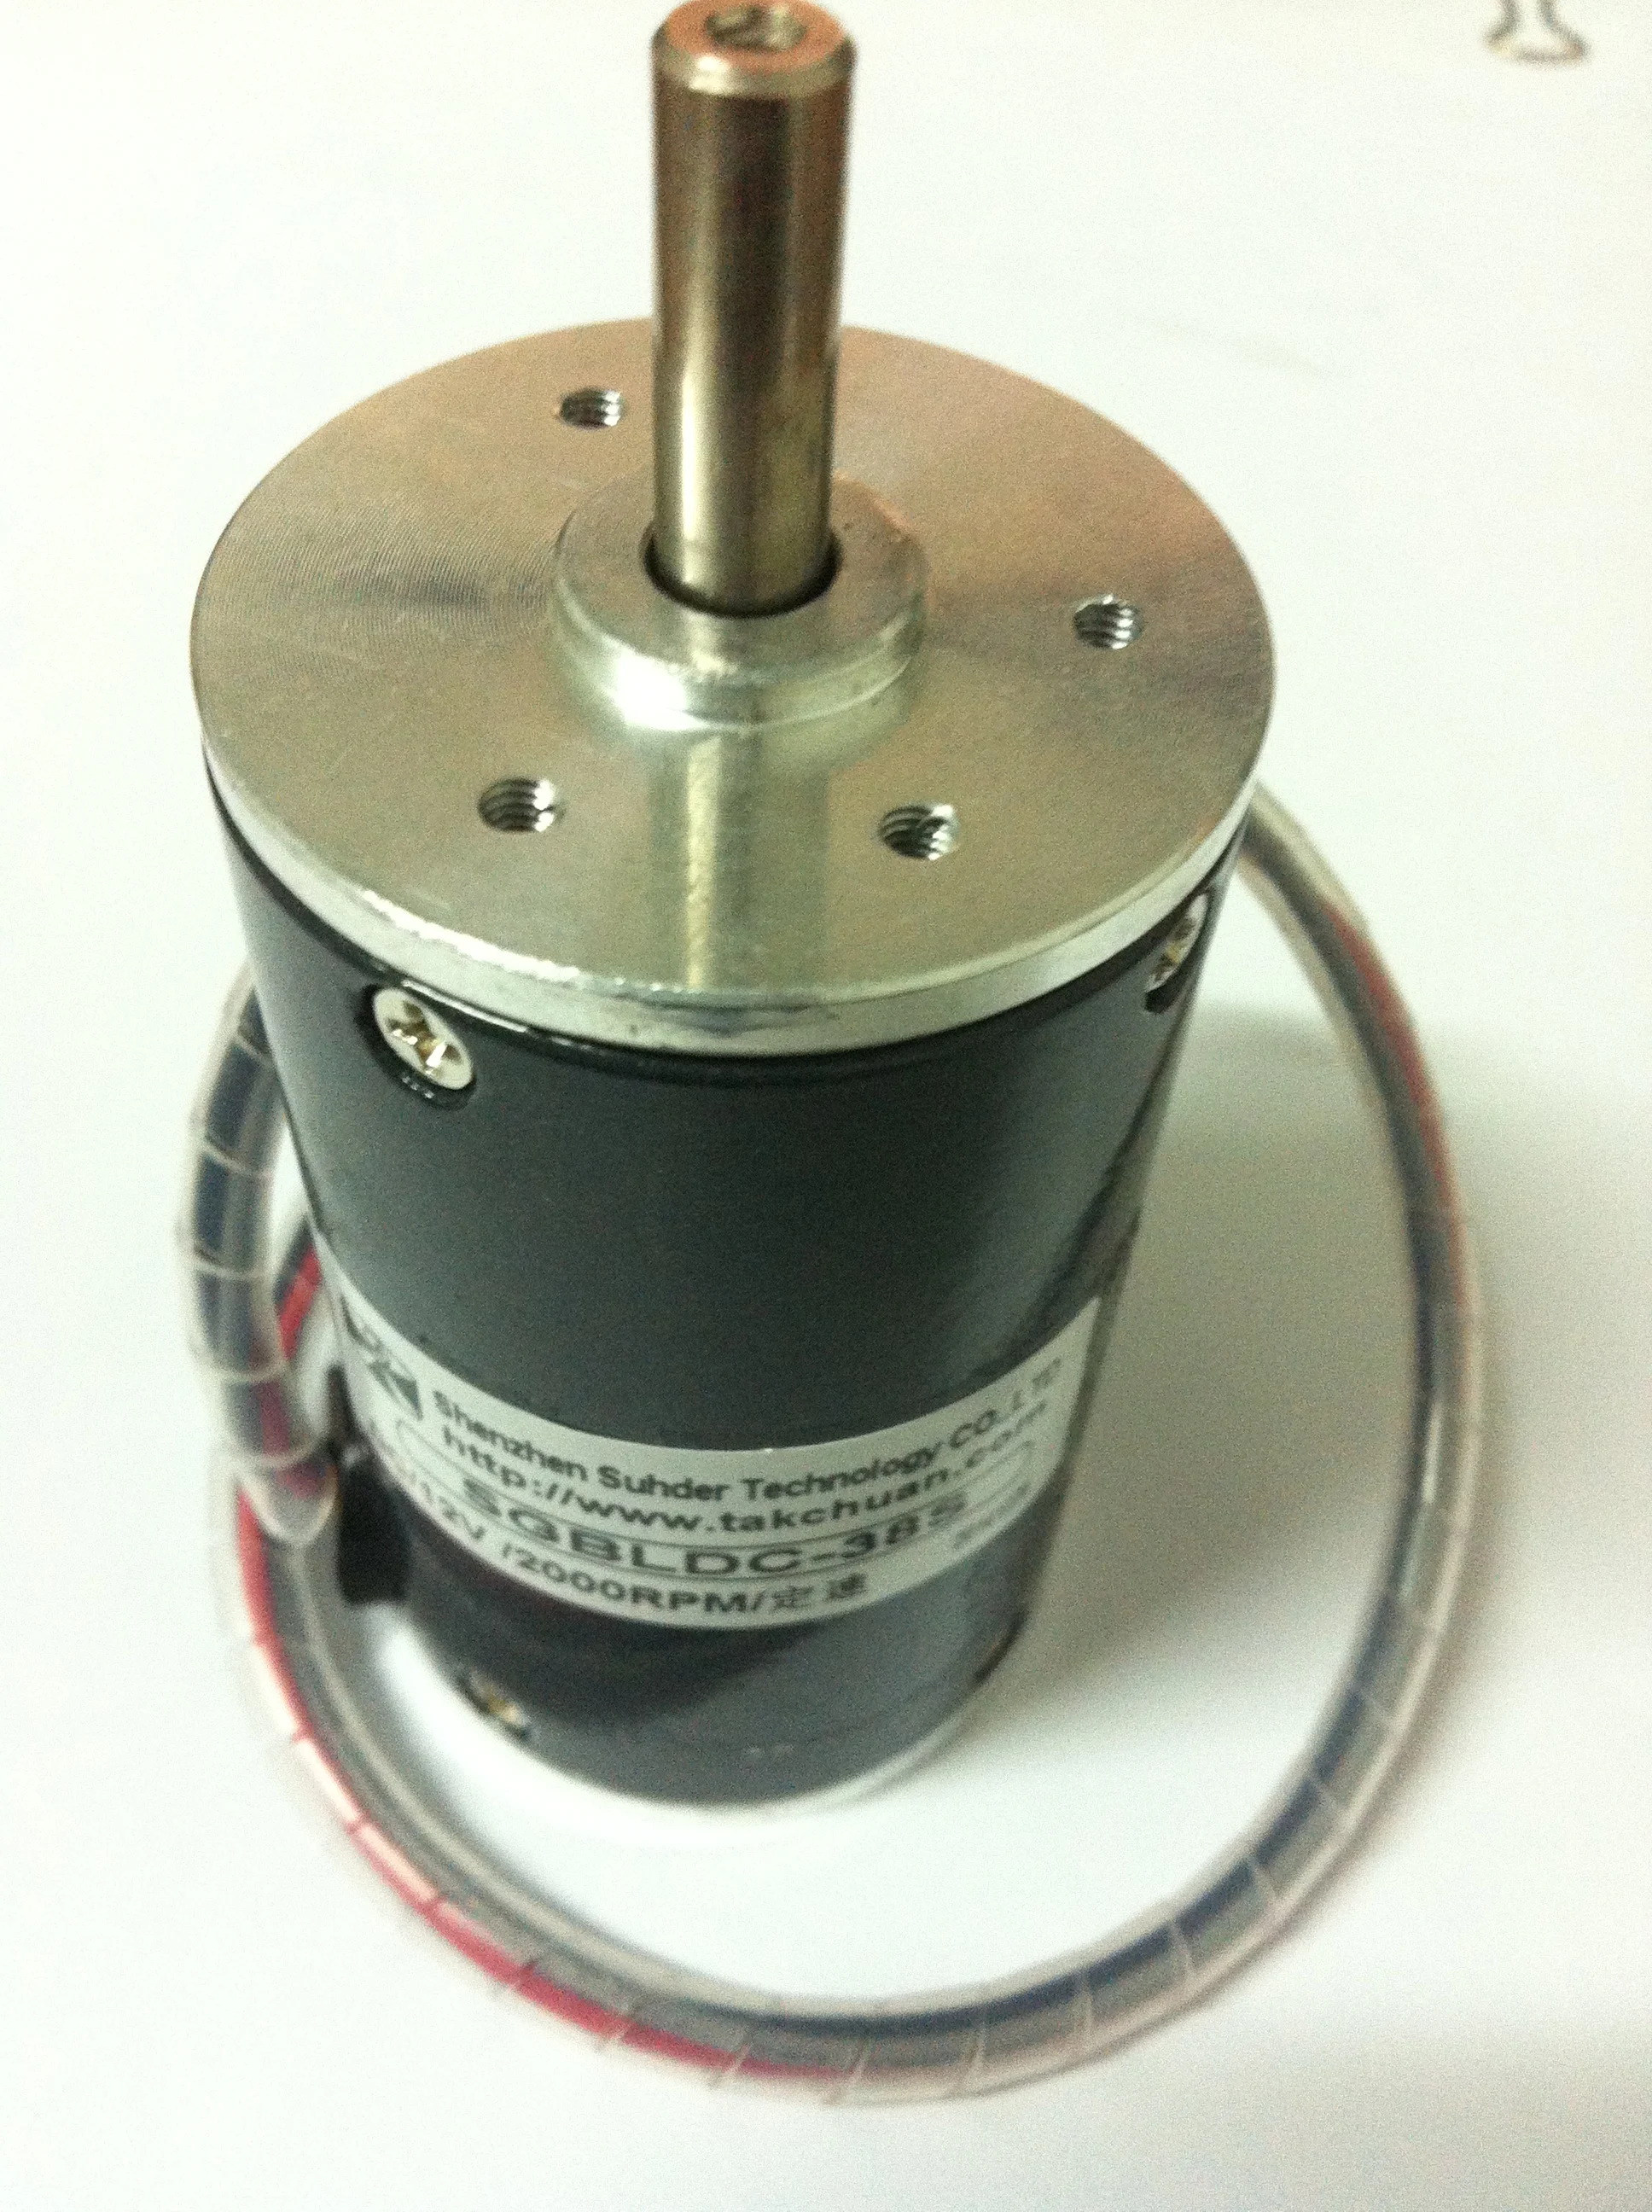 dc motor control with hip4082